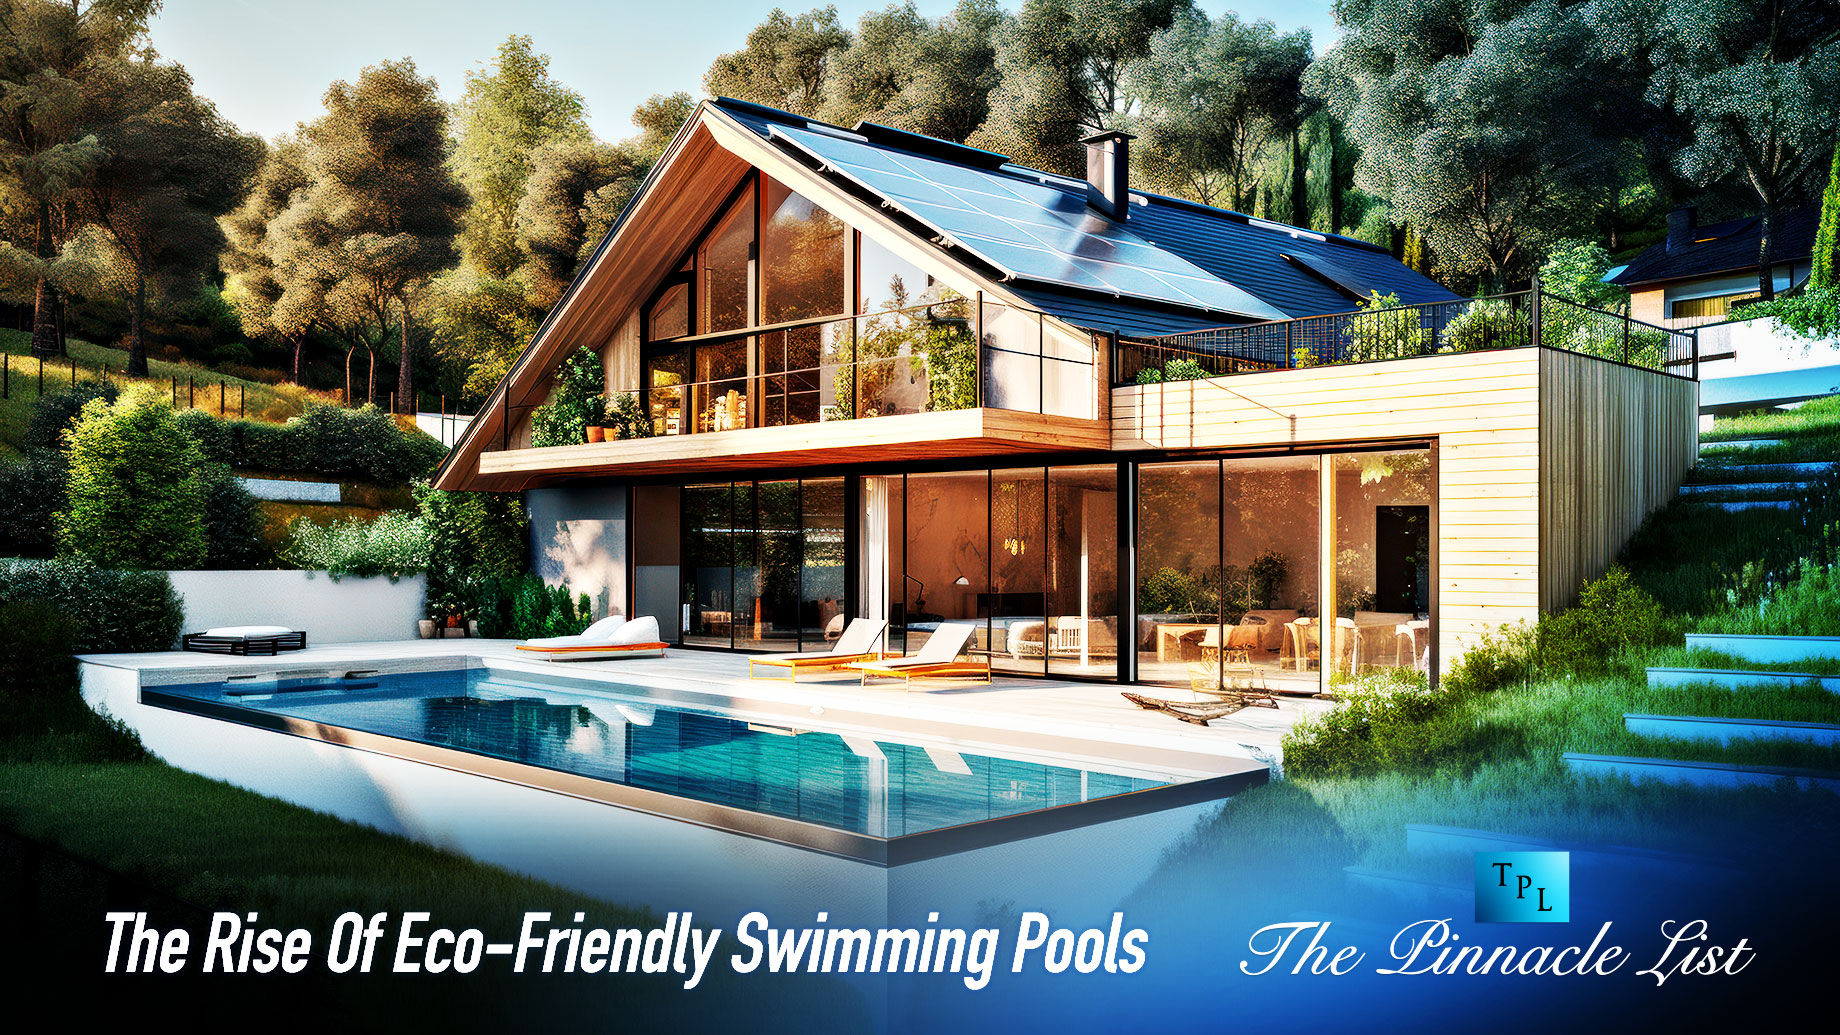 The Rise Of Eco-Friendly Swimming Pools